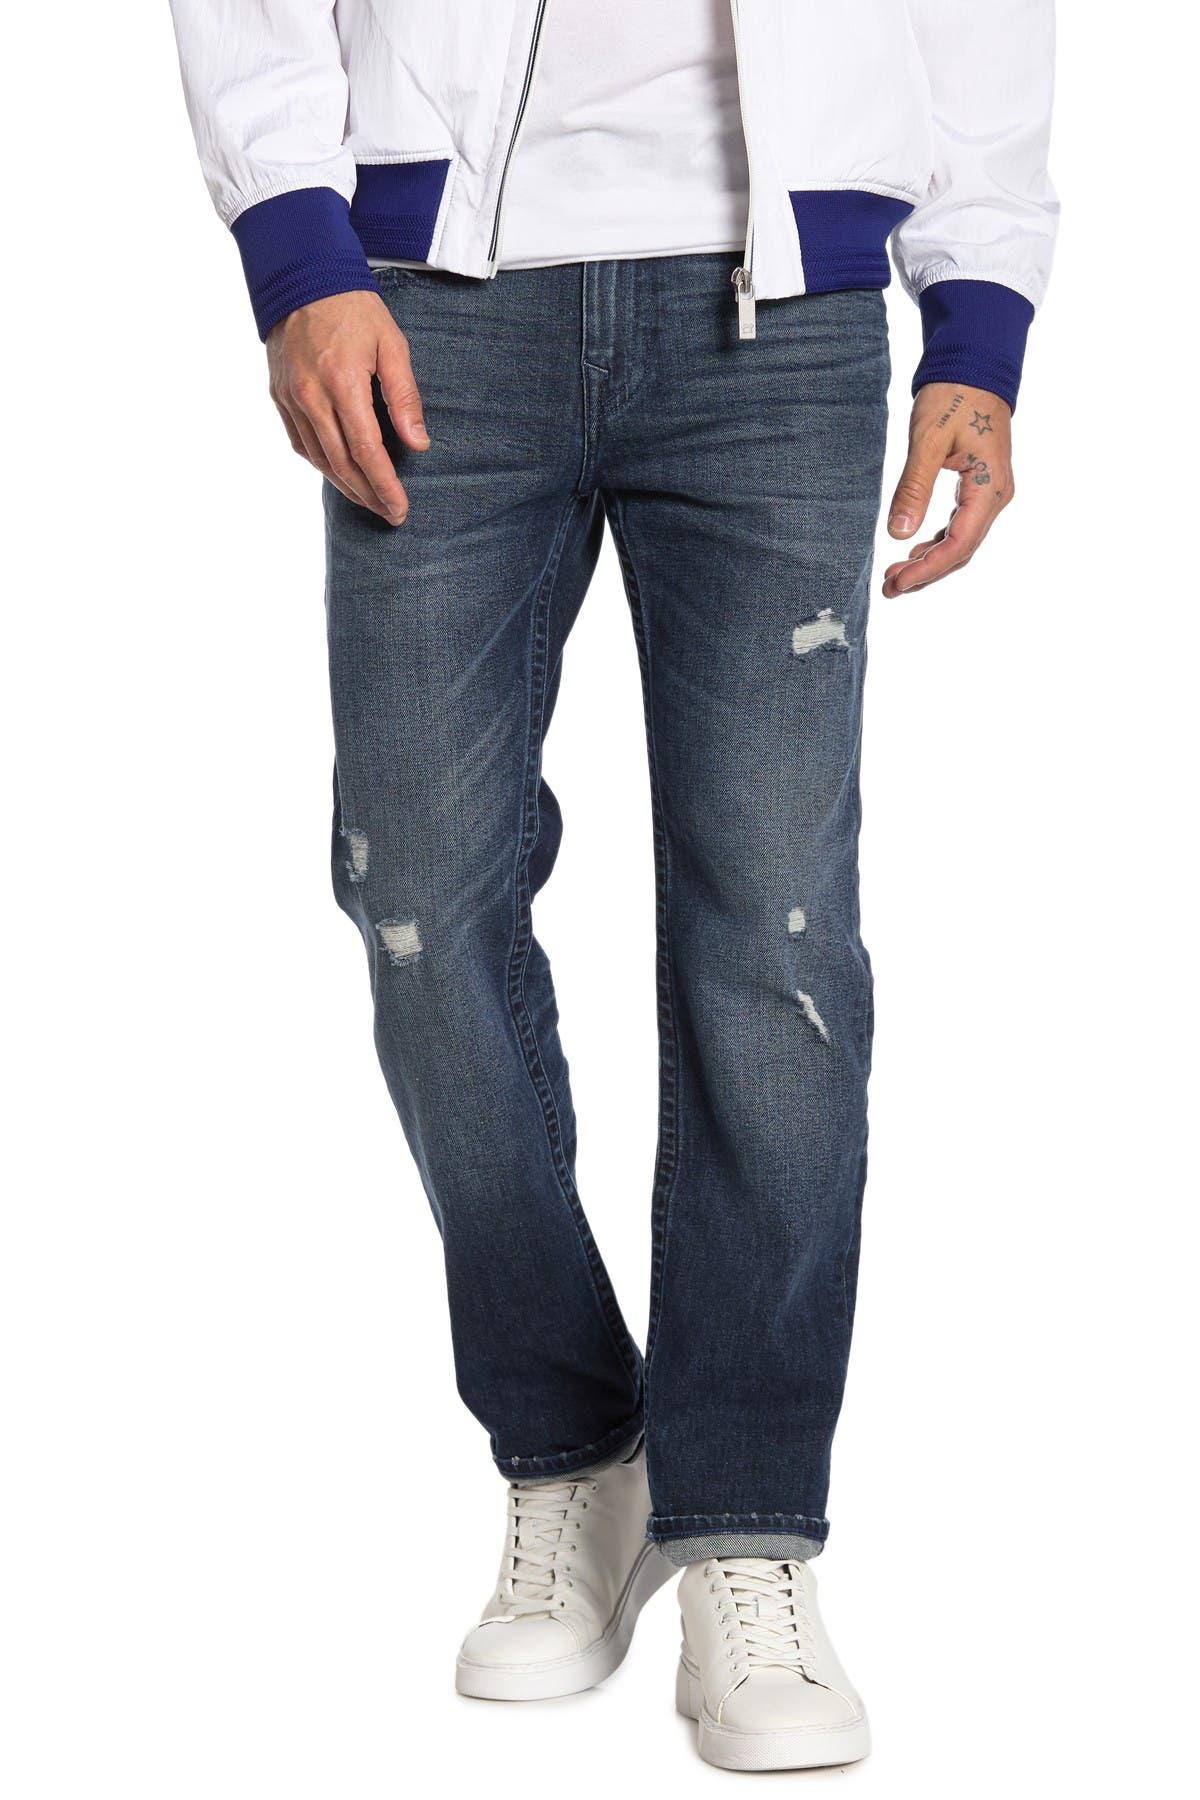 true religion geno relaxed slim jeans